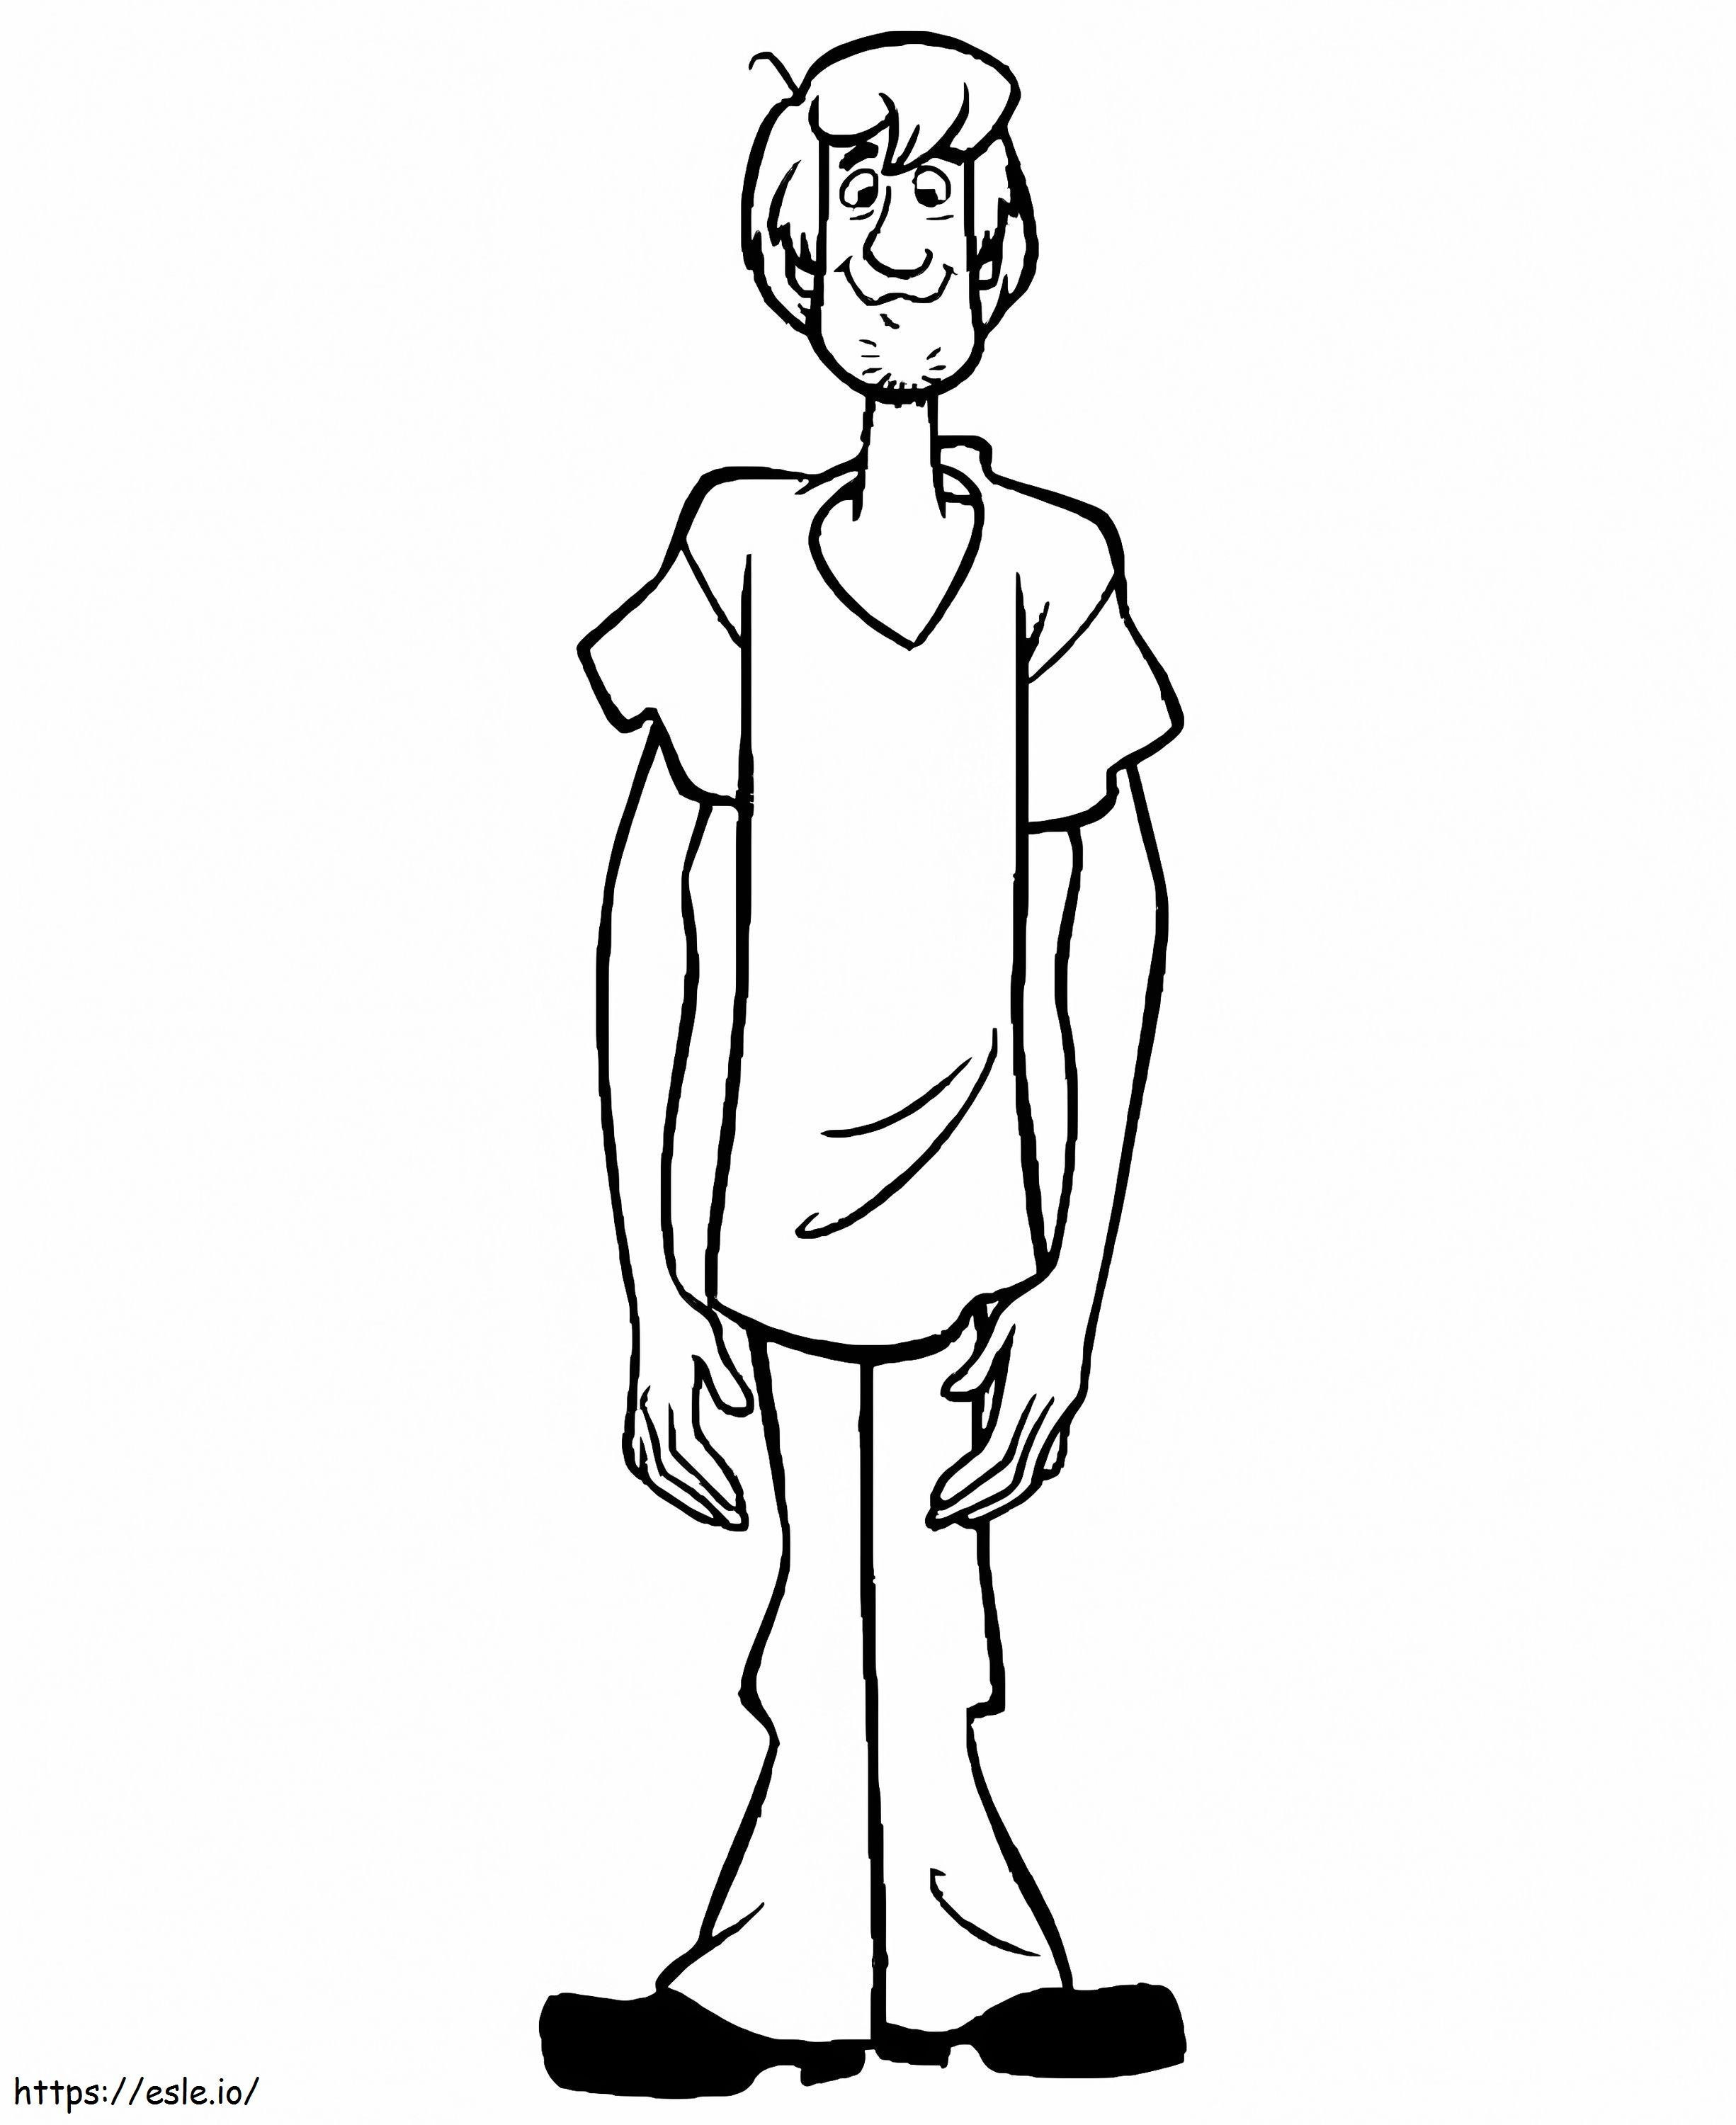 Shaggy Standing coloring page